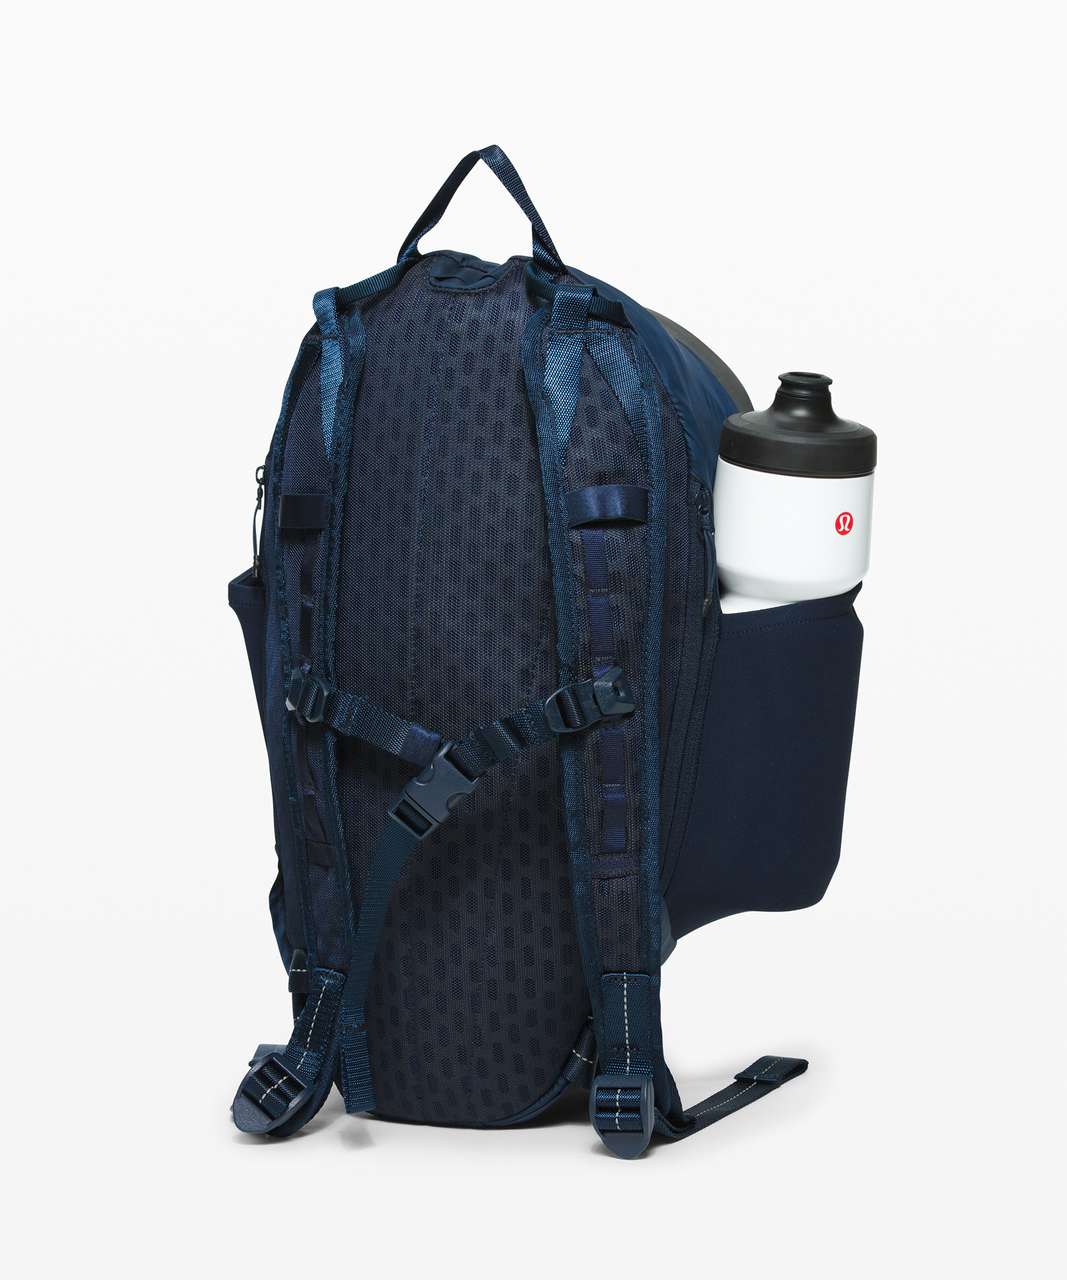 Lululemon Fast and Free Backpack *13L - True Navy